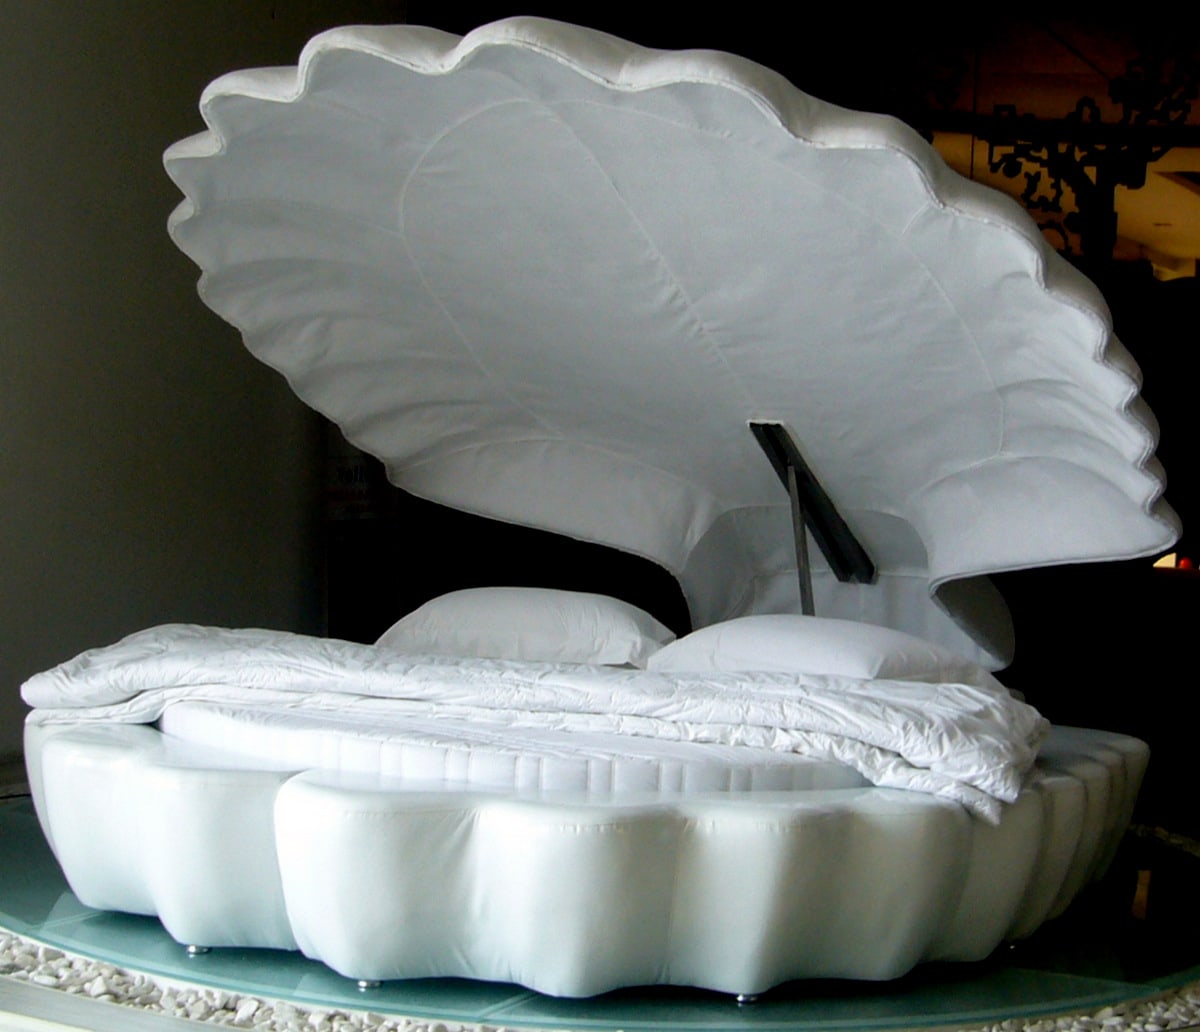 Giant seashell bed - Cool beds for grown-ups at Lilyvolt